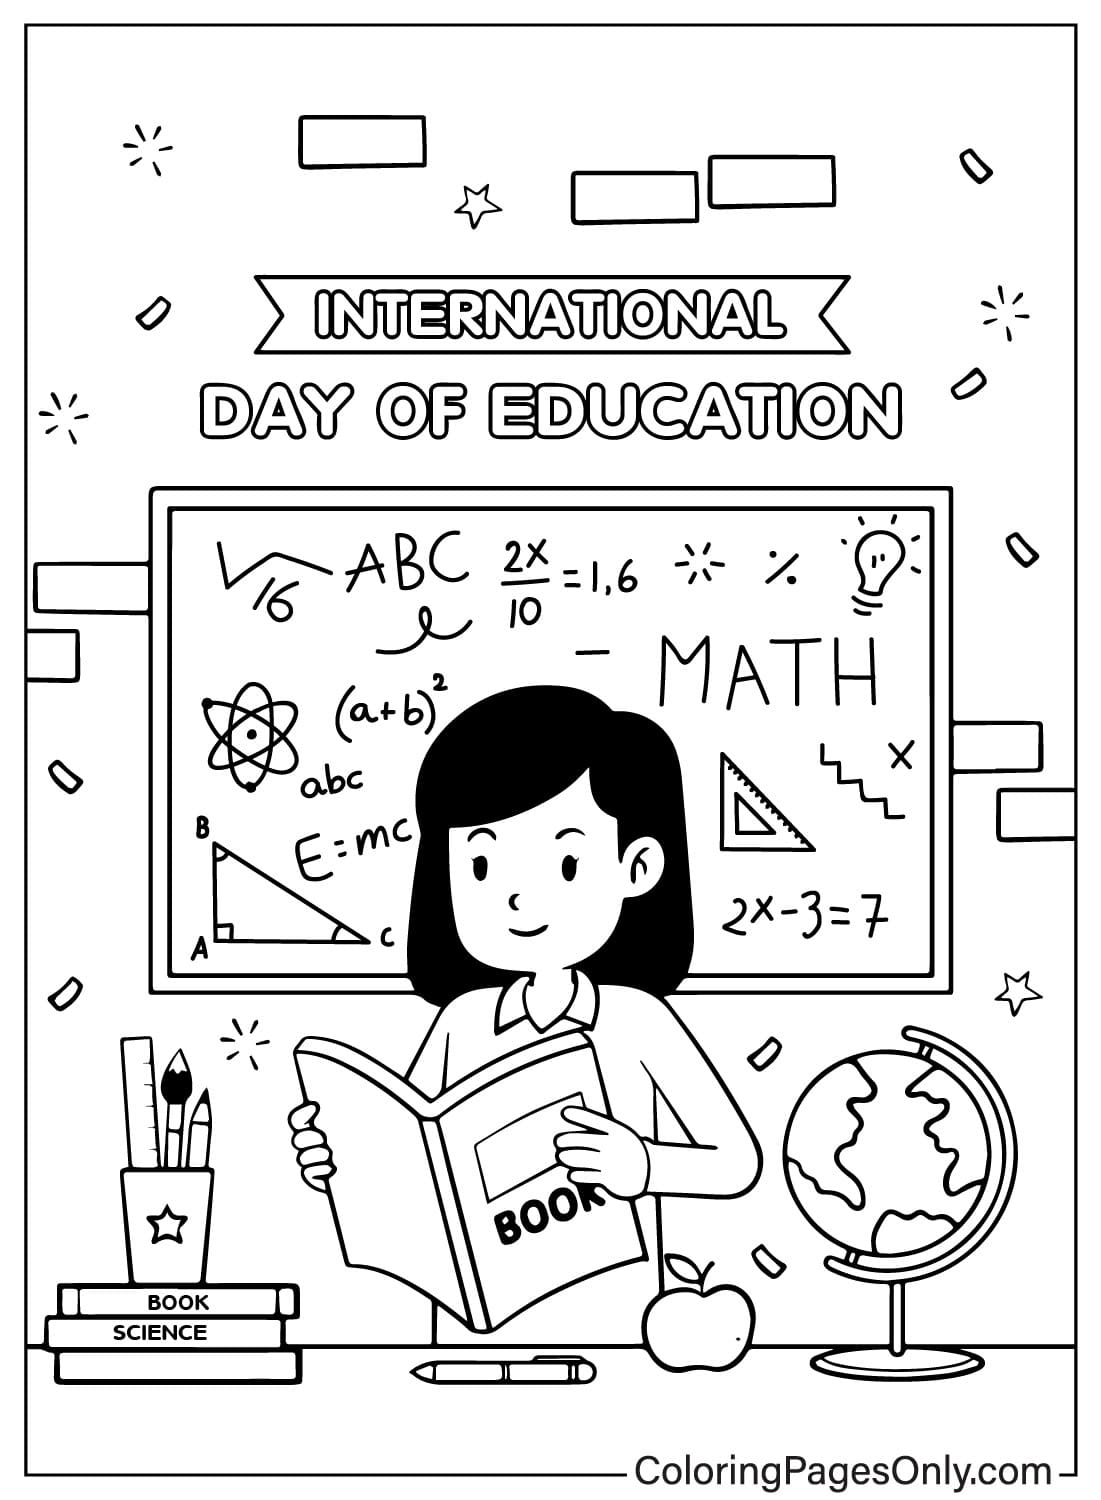 International Day of Education Coloring Sheet from International Day of Education